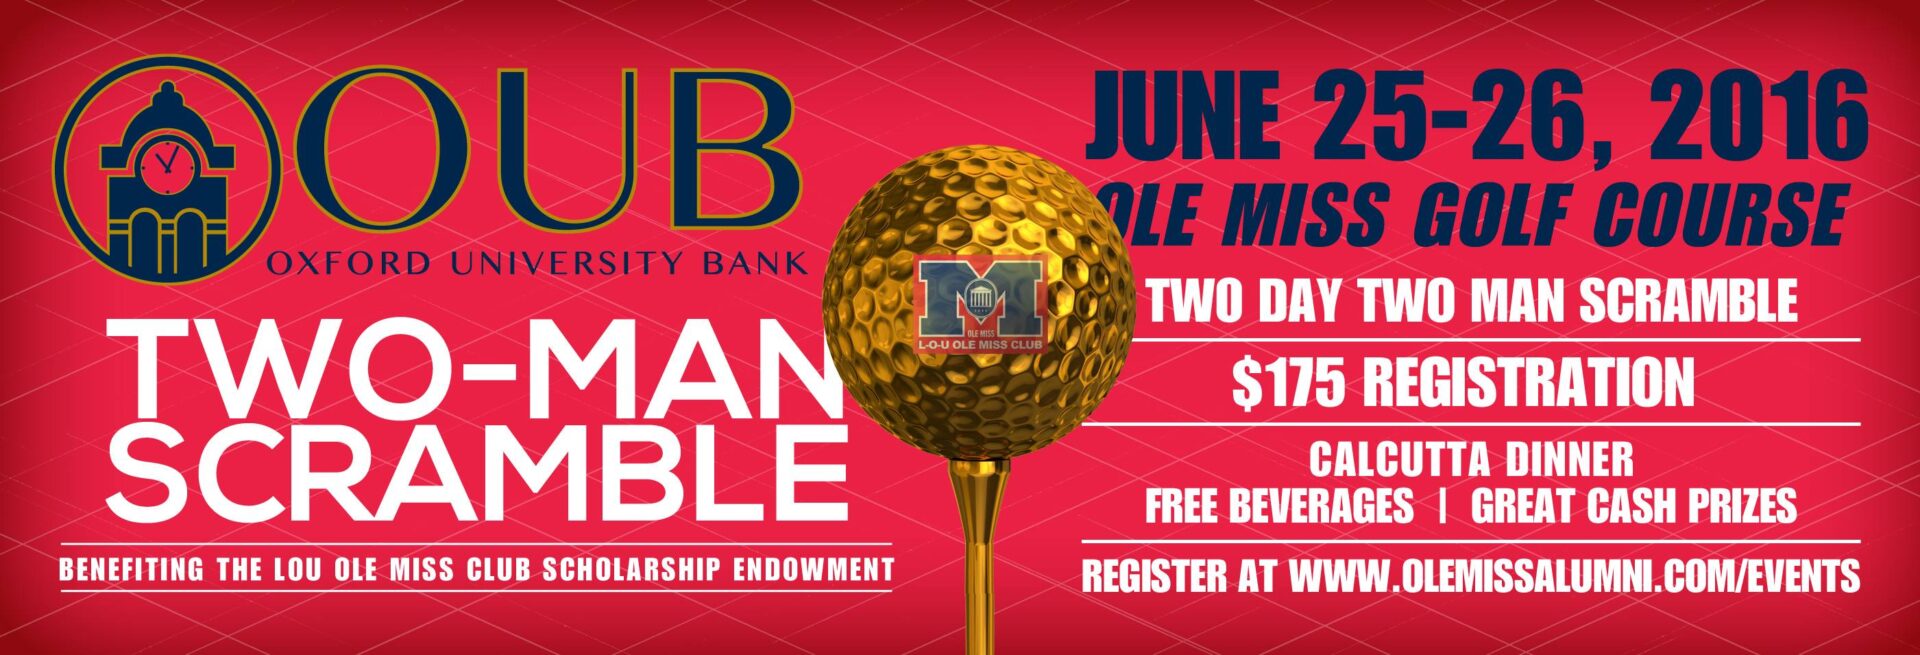 This is the fourth year of the Two-Man Scramble tournament.  